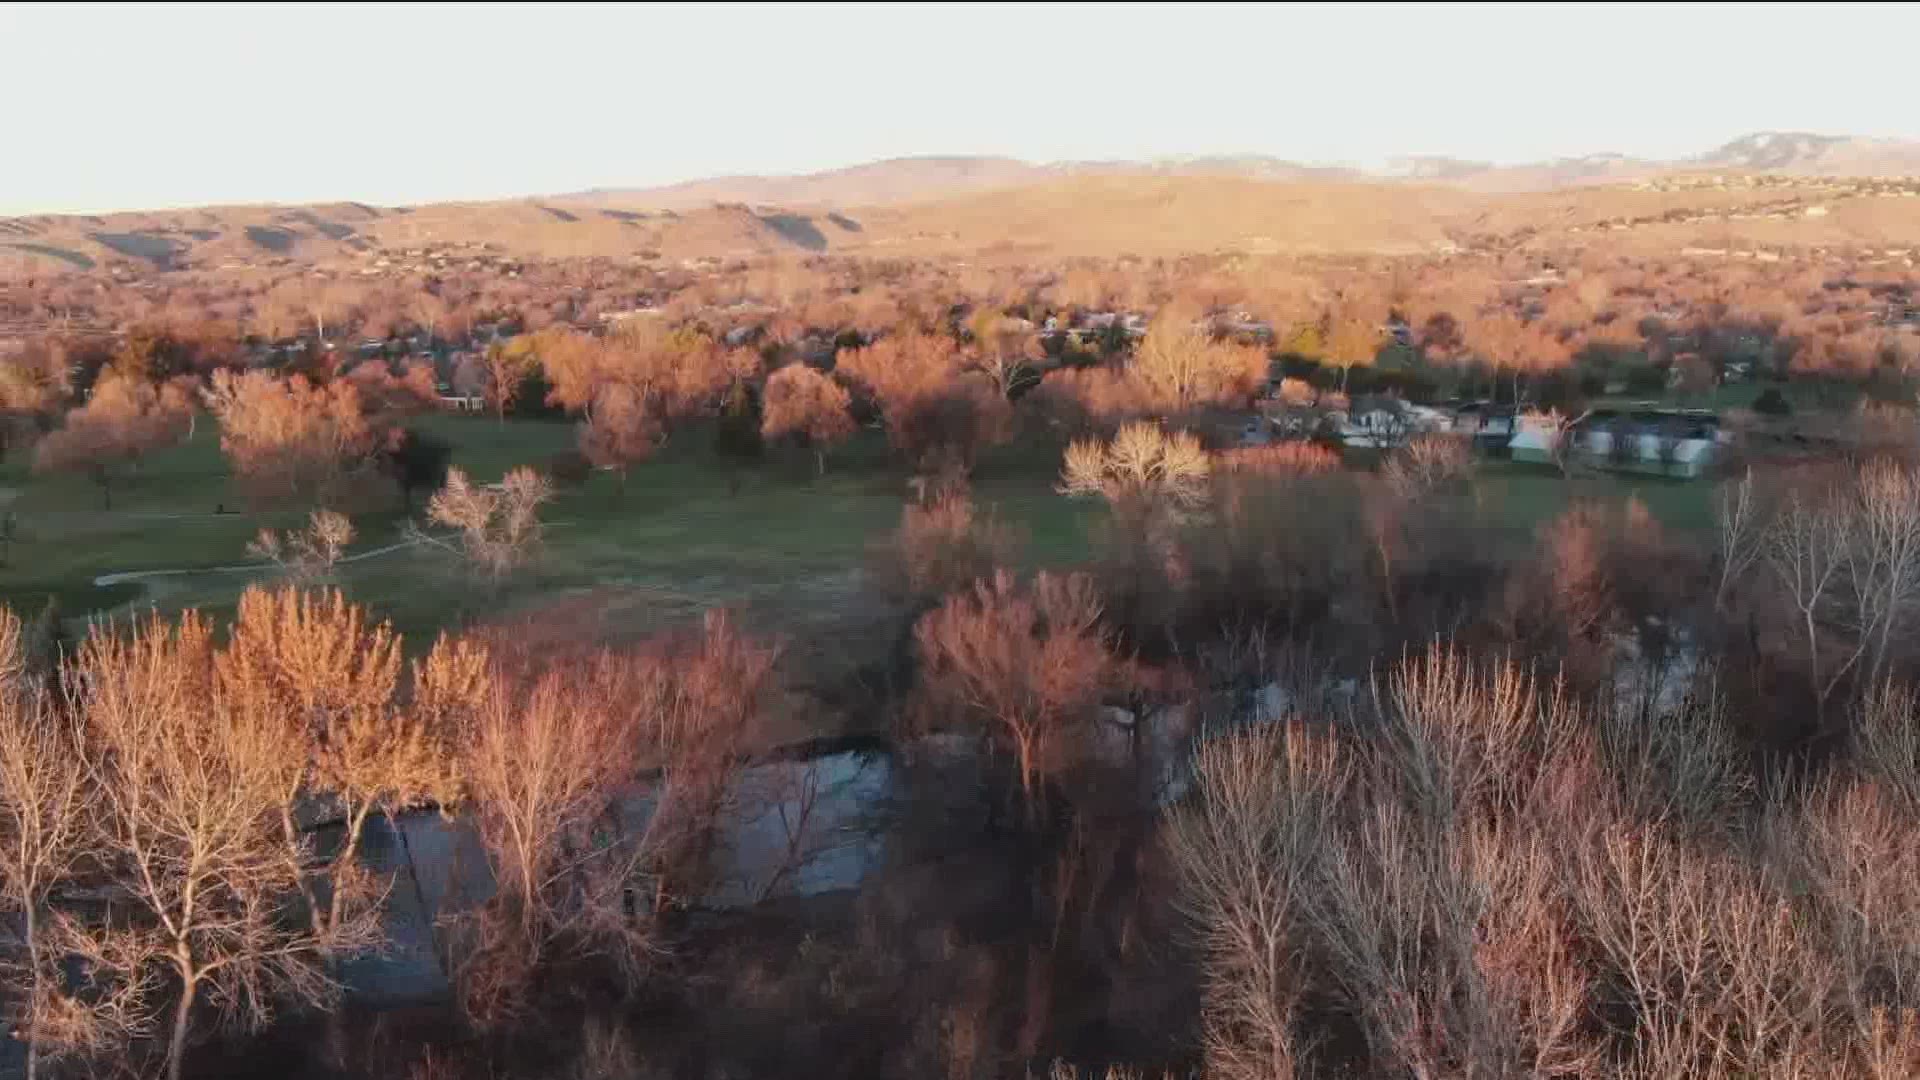 The River Club wants to expand its golf course onto an island in the Boise River. But conservation groups are calling foul.